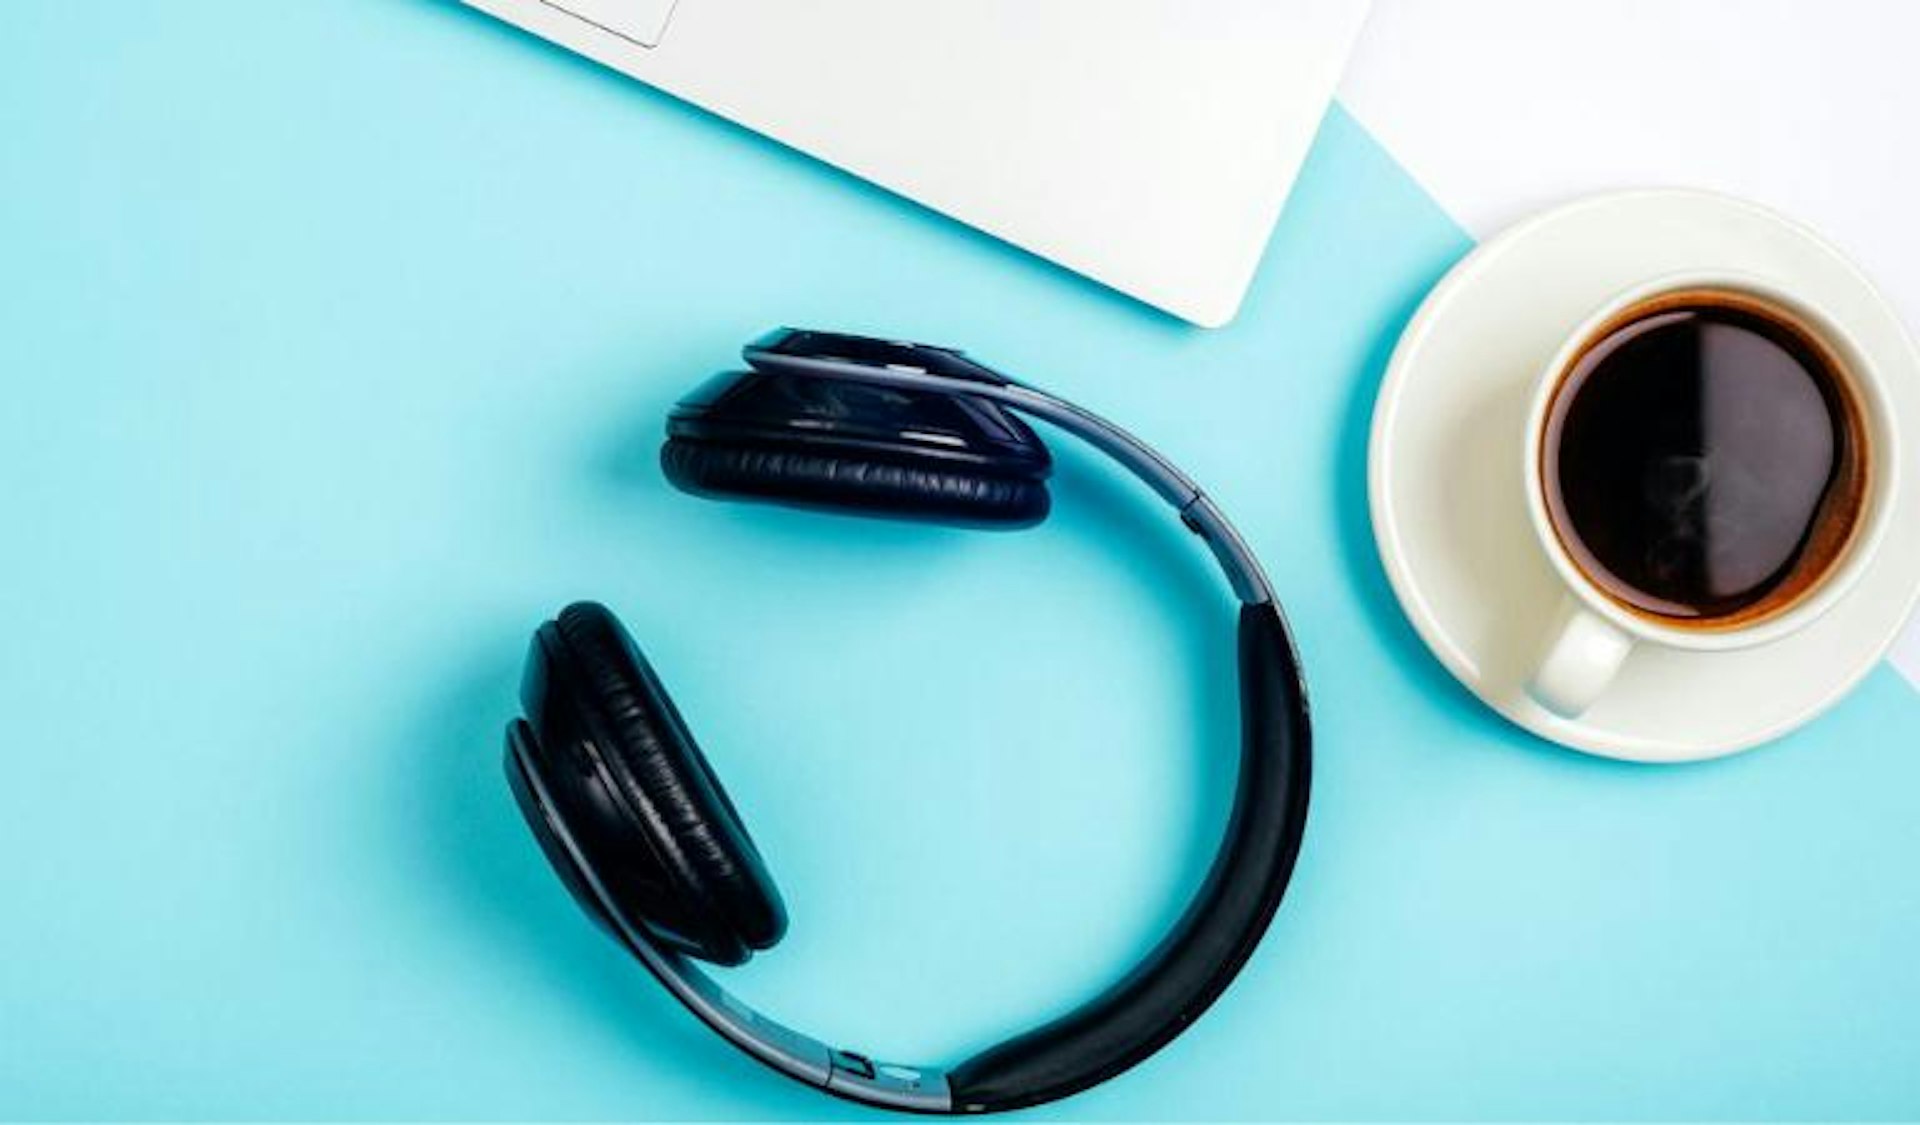 This is everything you need to know about choosing podcast headphones.